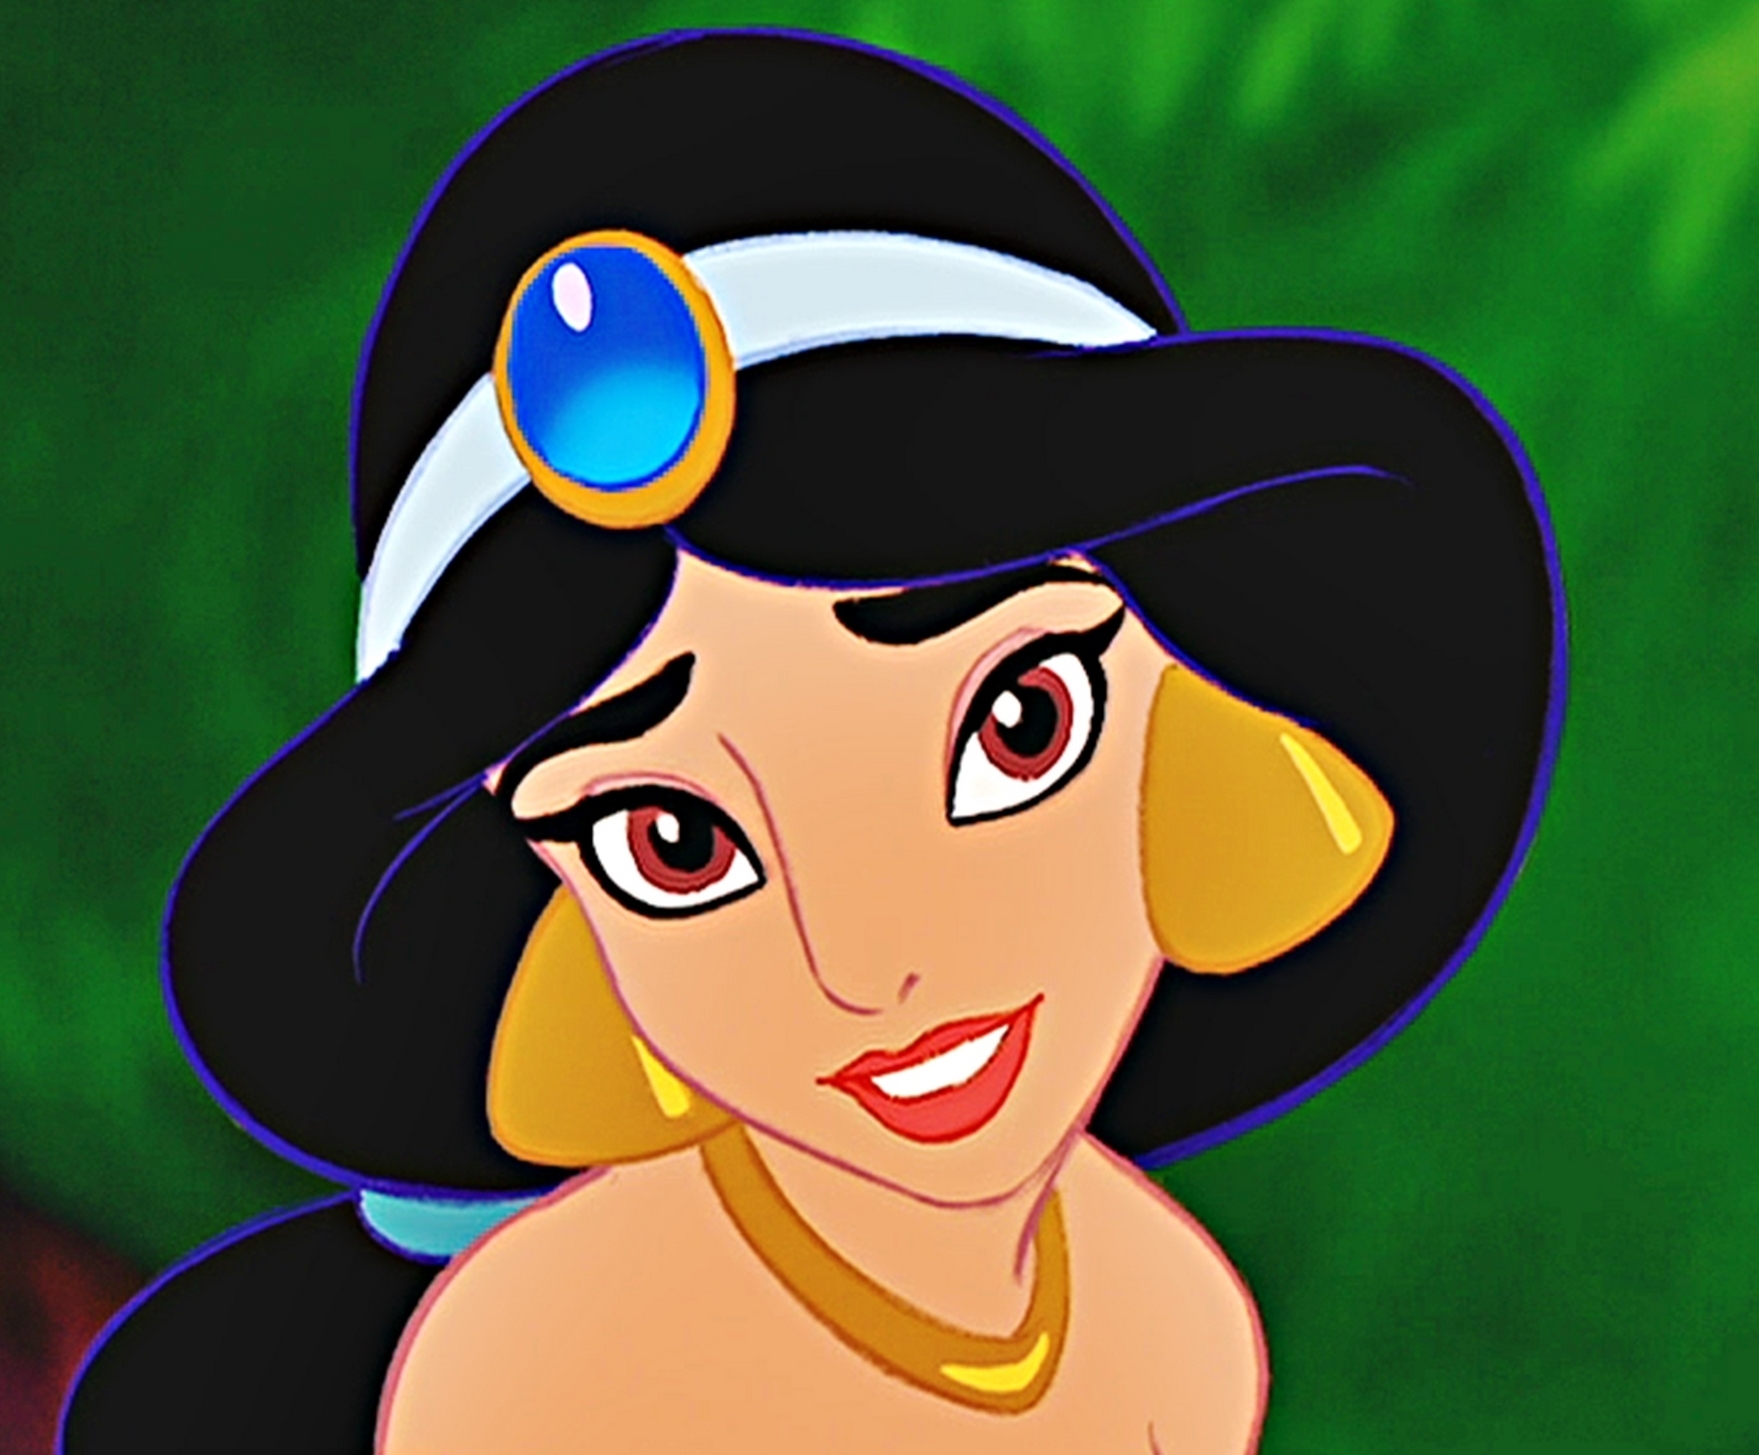 18 Human Female Disney Characters - Pick Your Favorite Female Character